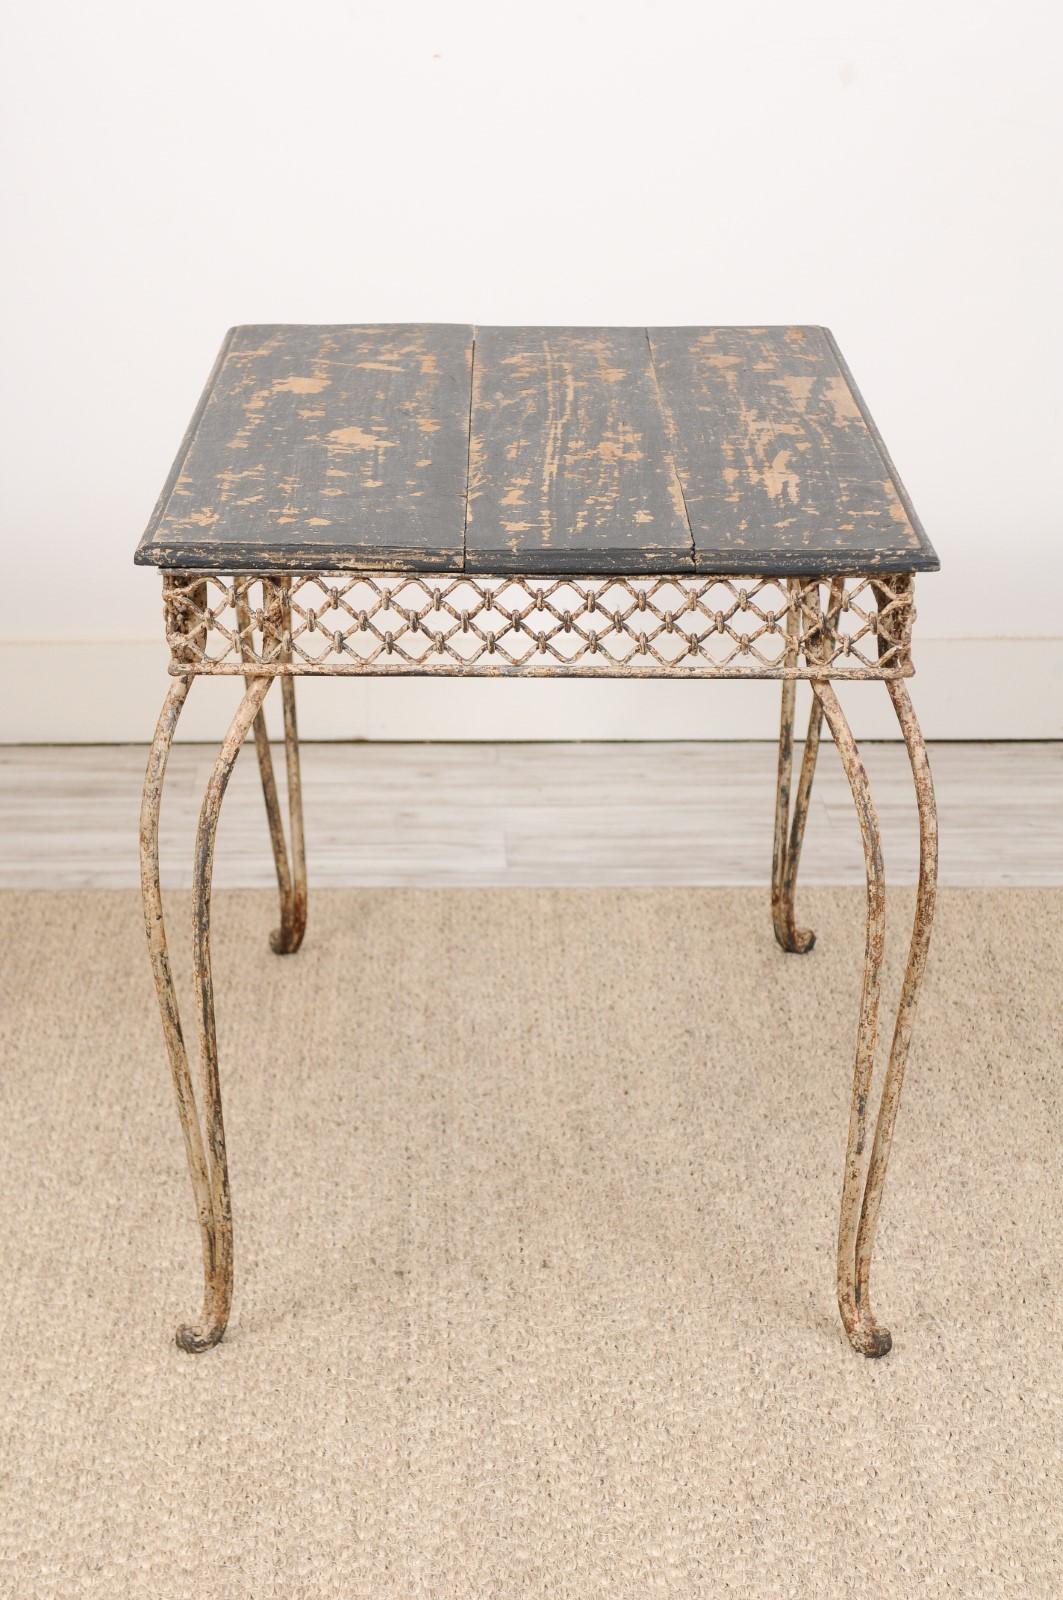 Late 19th Century Iron and Wood Garden Table 7